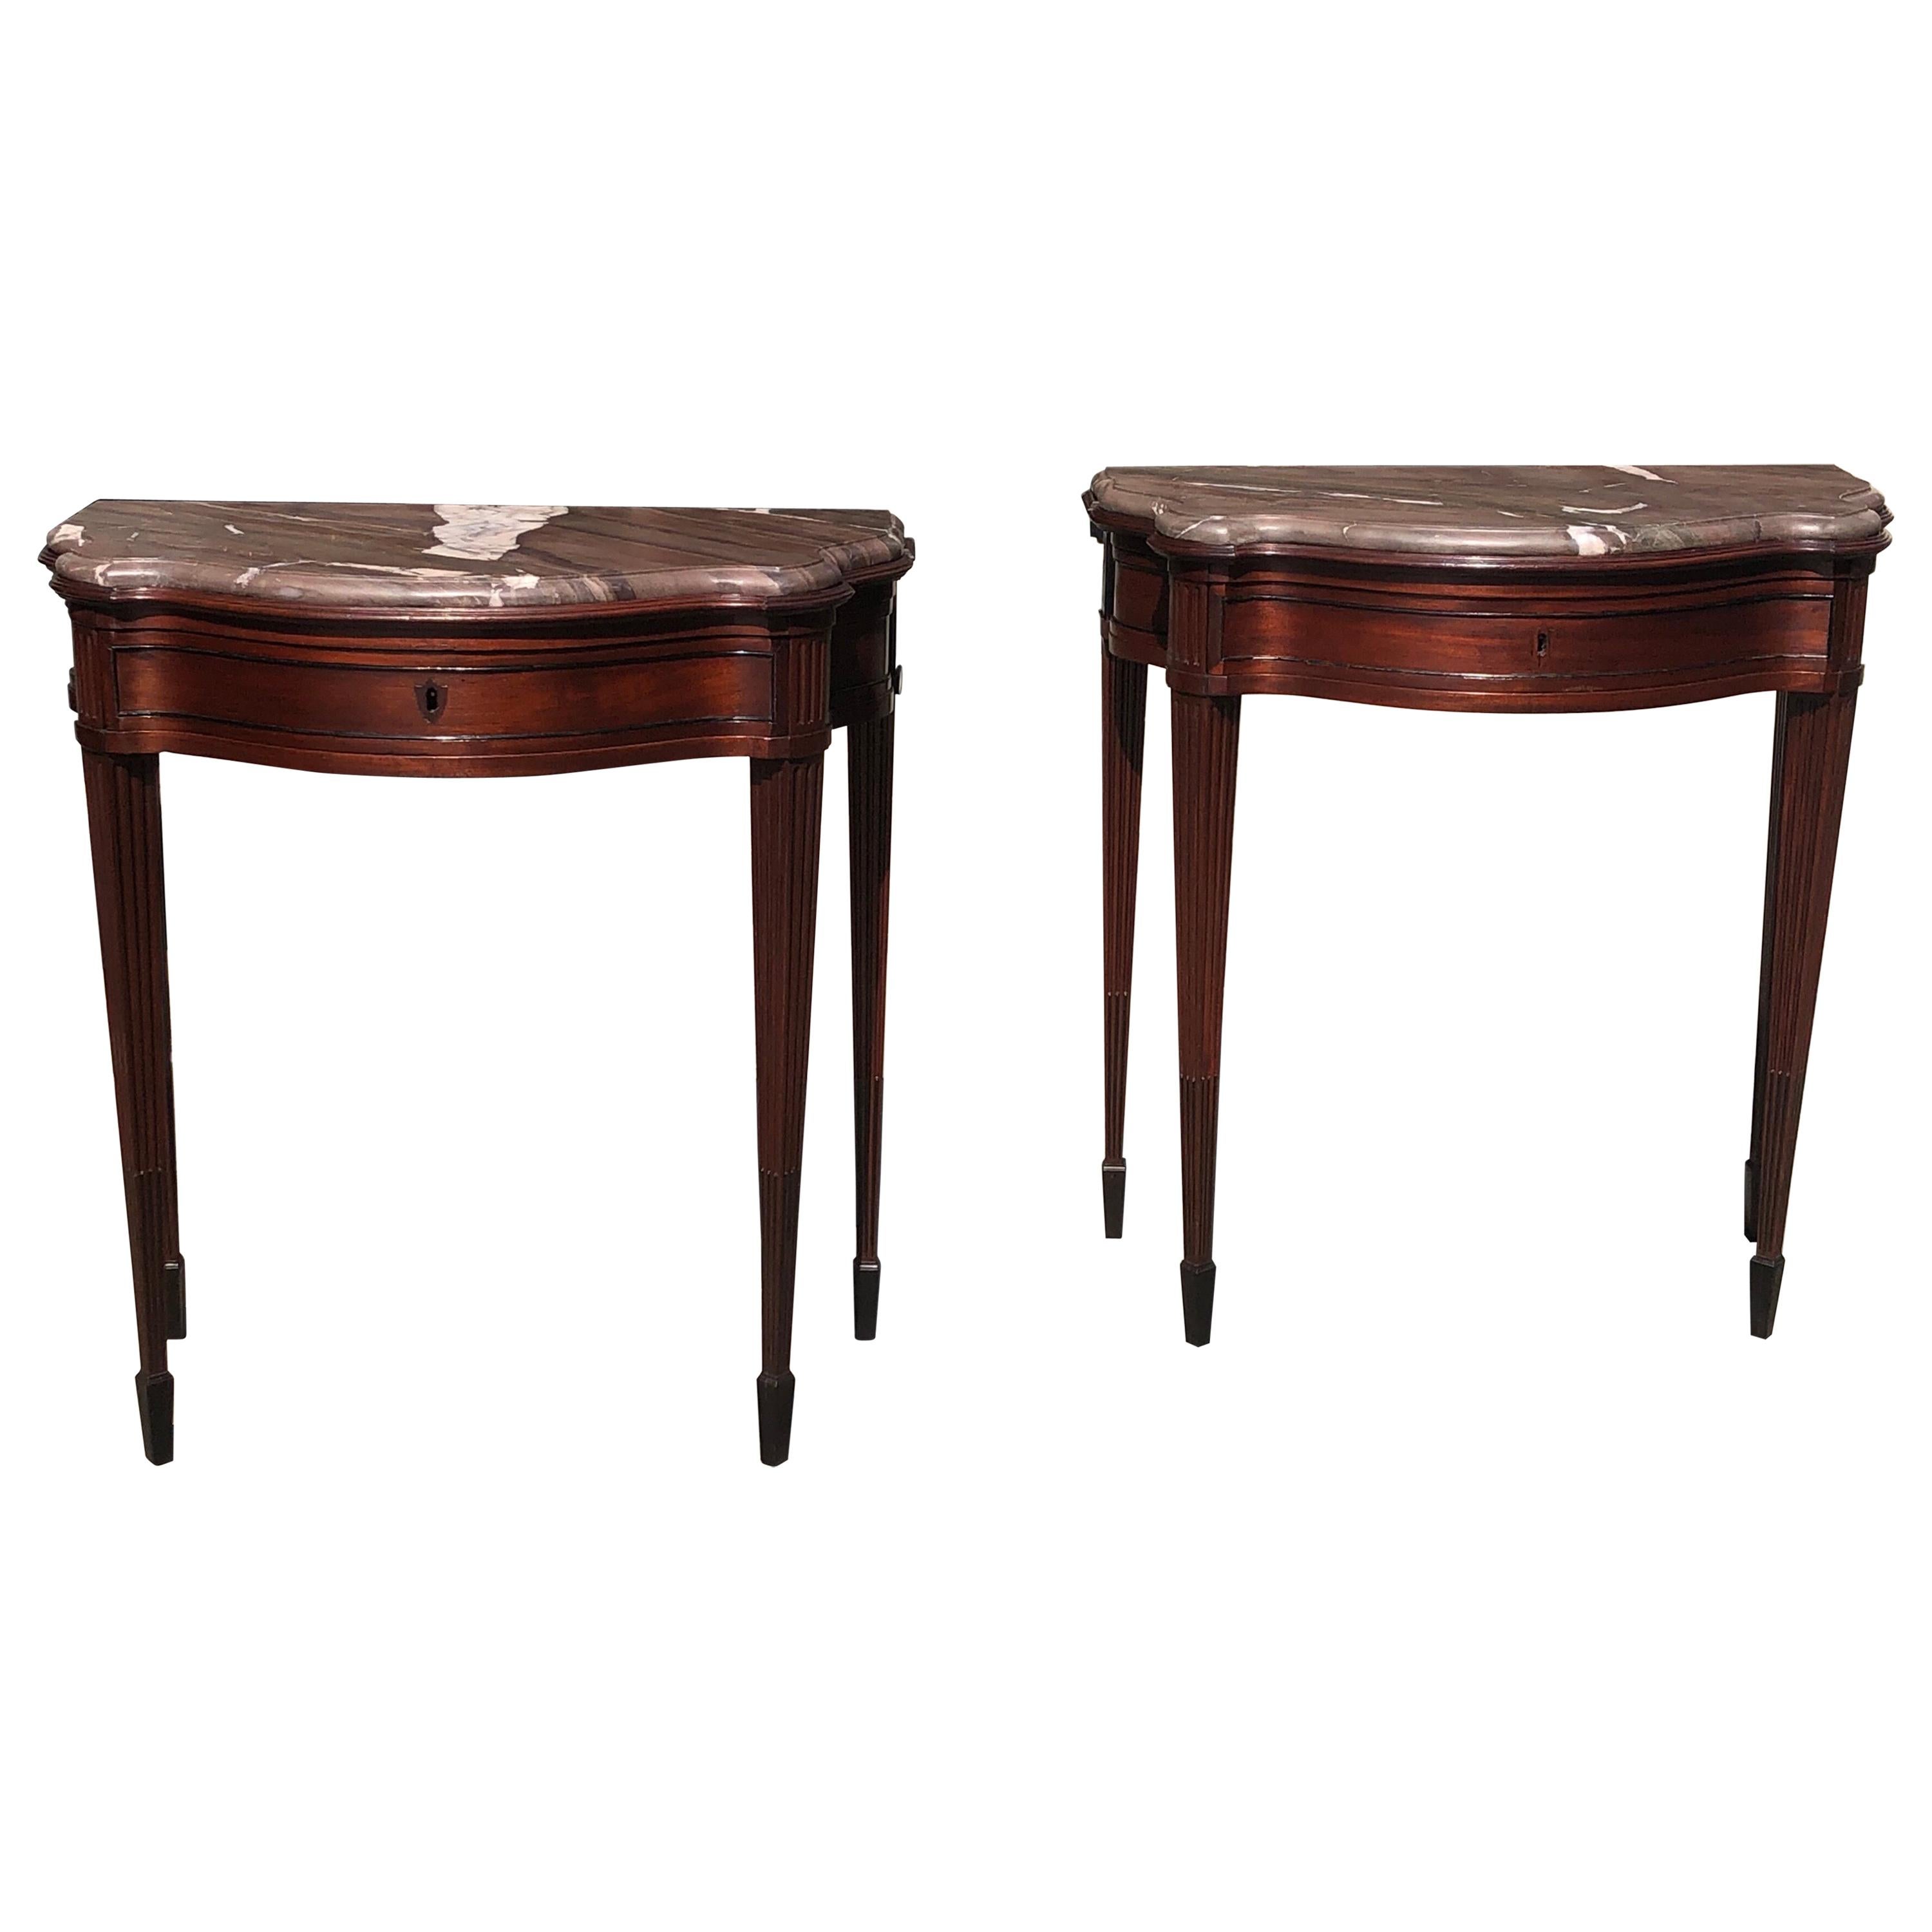 Pair of Late 18th Century Mahogany and Marble English Console Tables